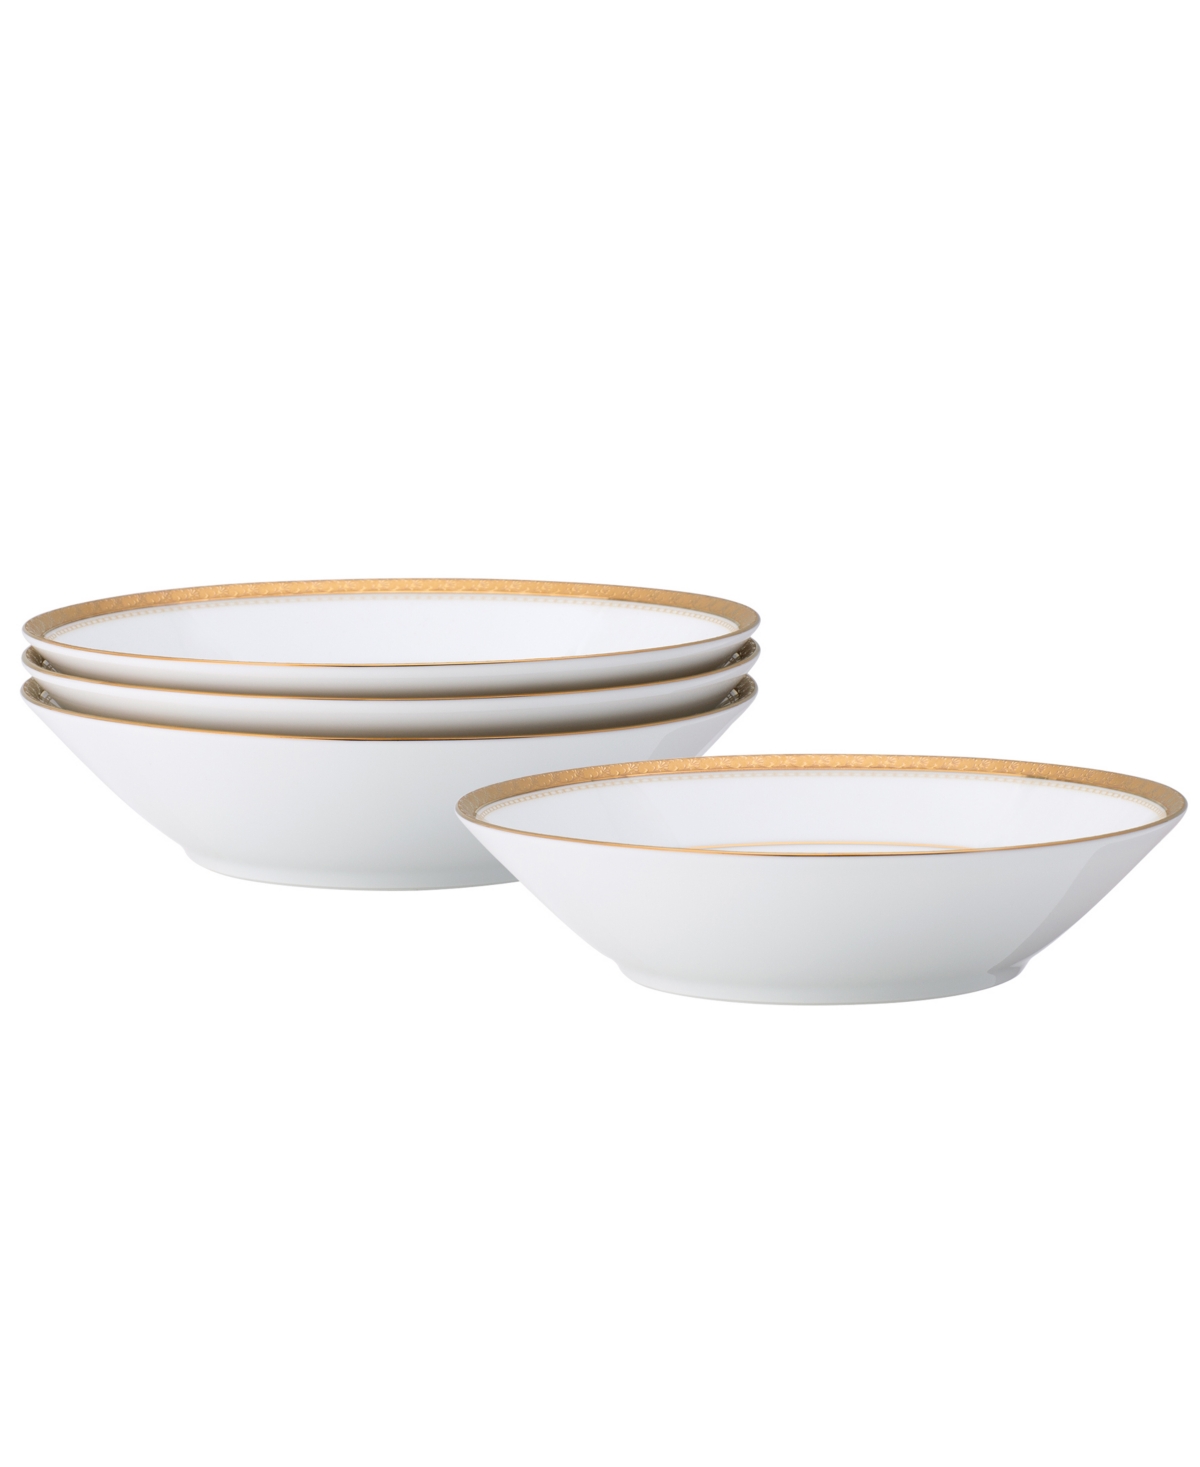 Noritake Charlotta Gold Set Of 4 Soup Bowls, Service For 4 In White And Gold-tone